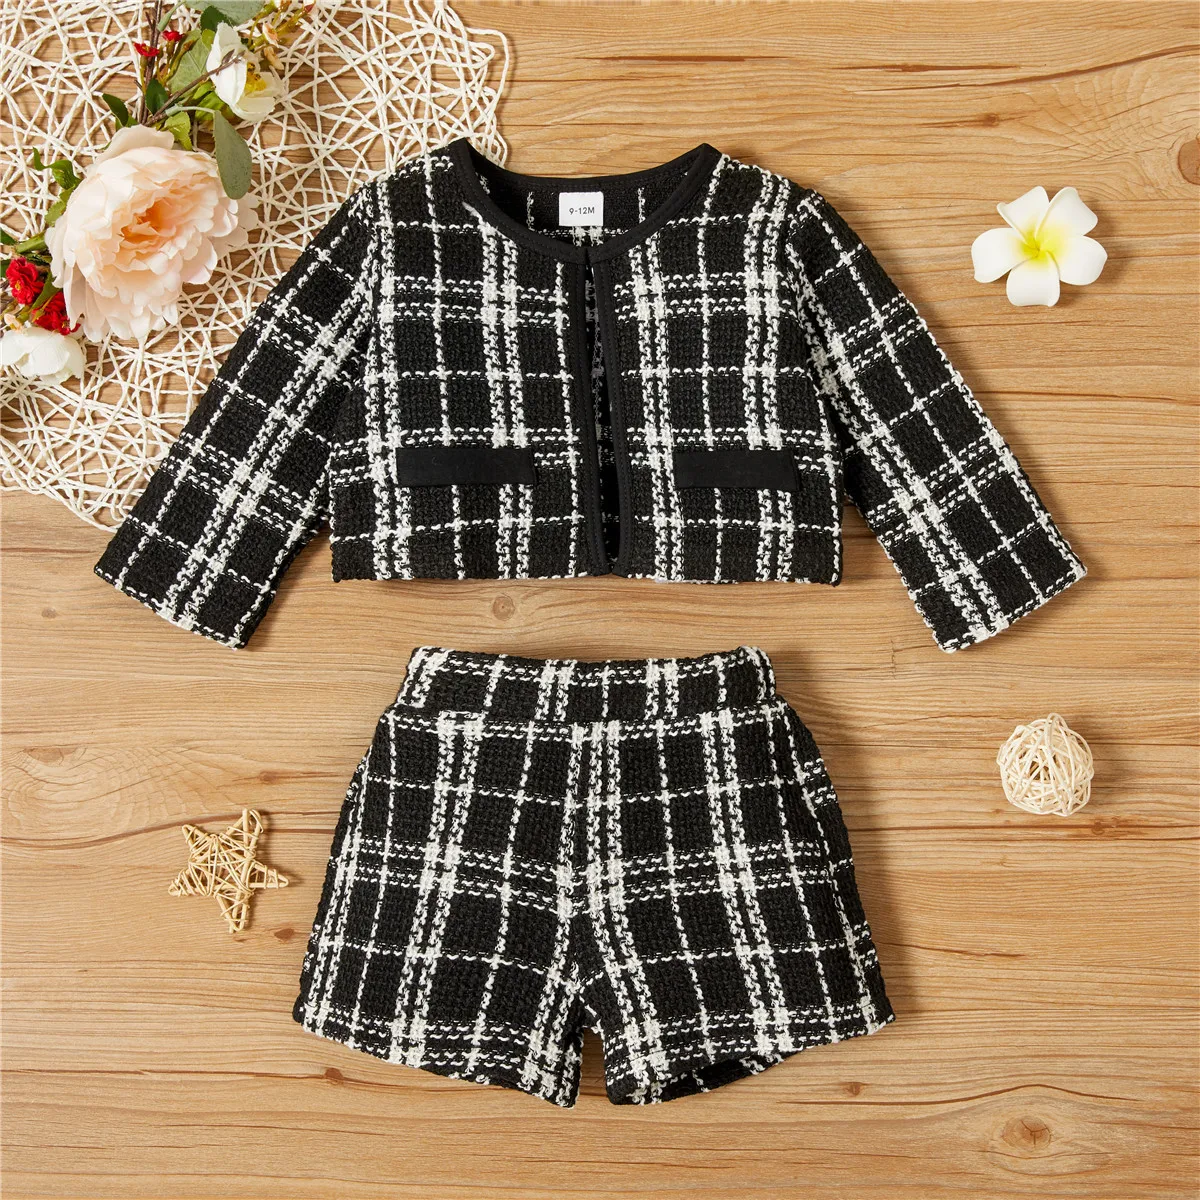 baby clothing set line Girls Classic Plaid Clothing Set Cardigan Jackets+Plaid Pants Baby Girl Kids Elegant Children Spring Autumn Clothes Outfits Baby Clothing Set best of sale